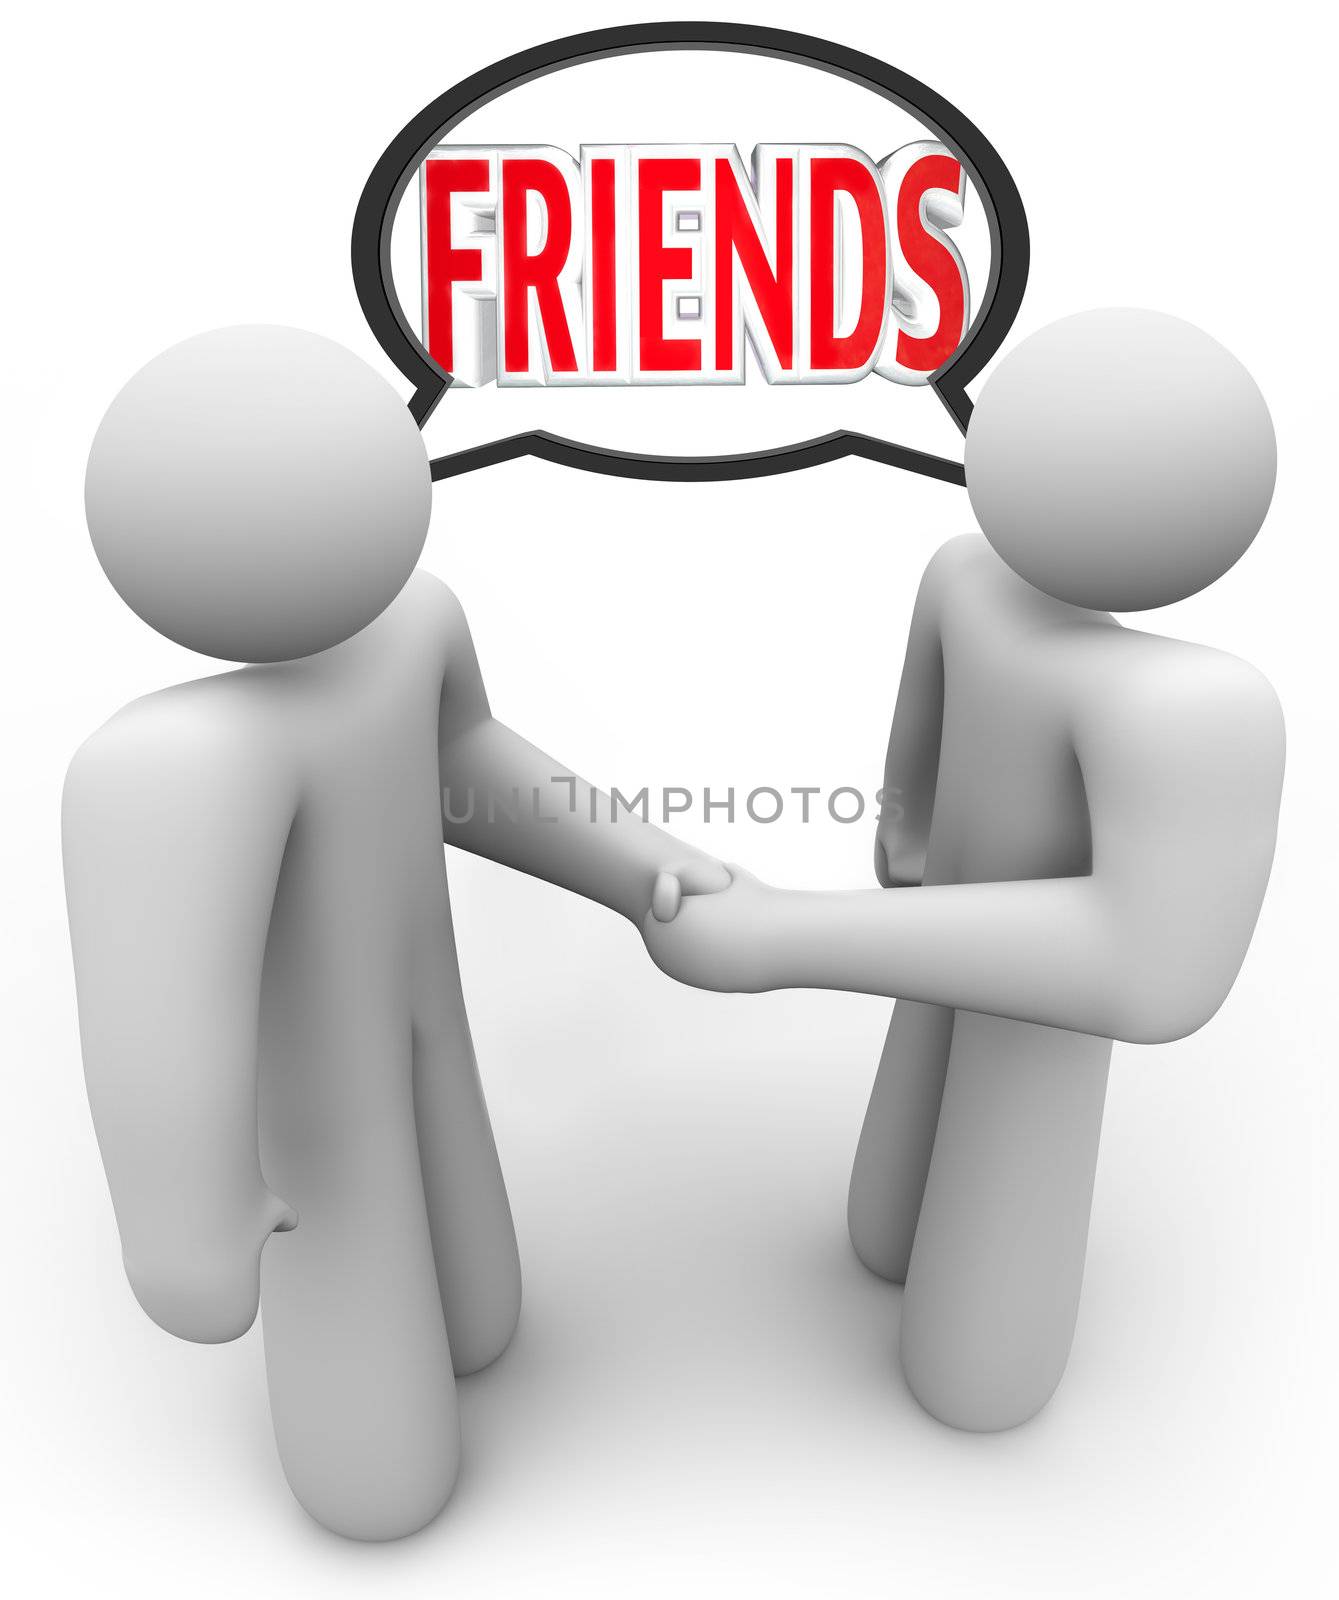 The word Friends in a speech bubble or cloud above two people shaking hands, symbolizing a welcome, meeting, friendly attitude, social interaction and networking